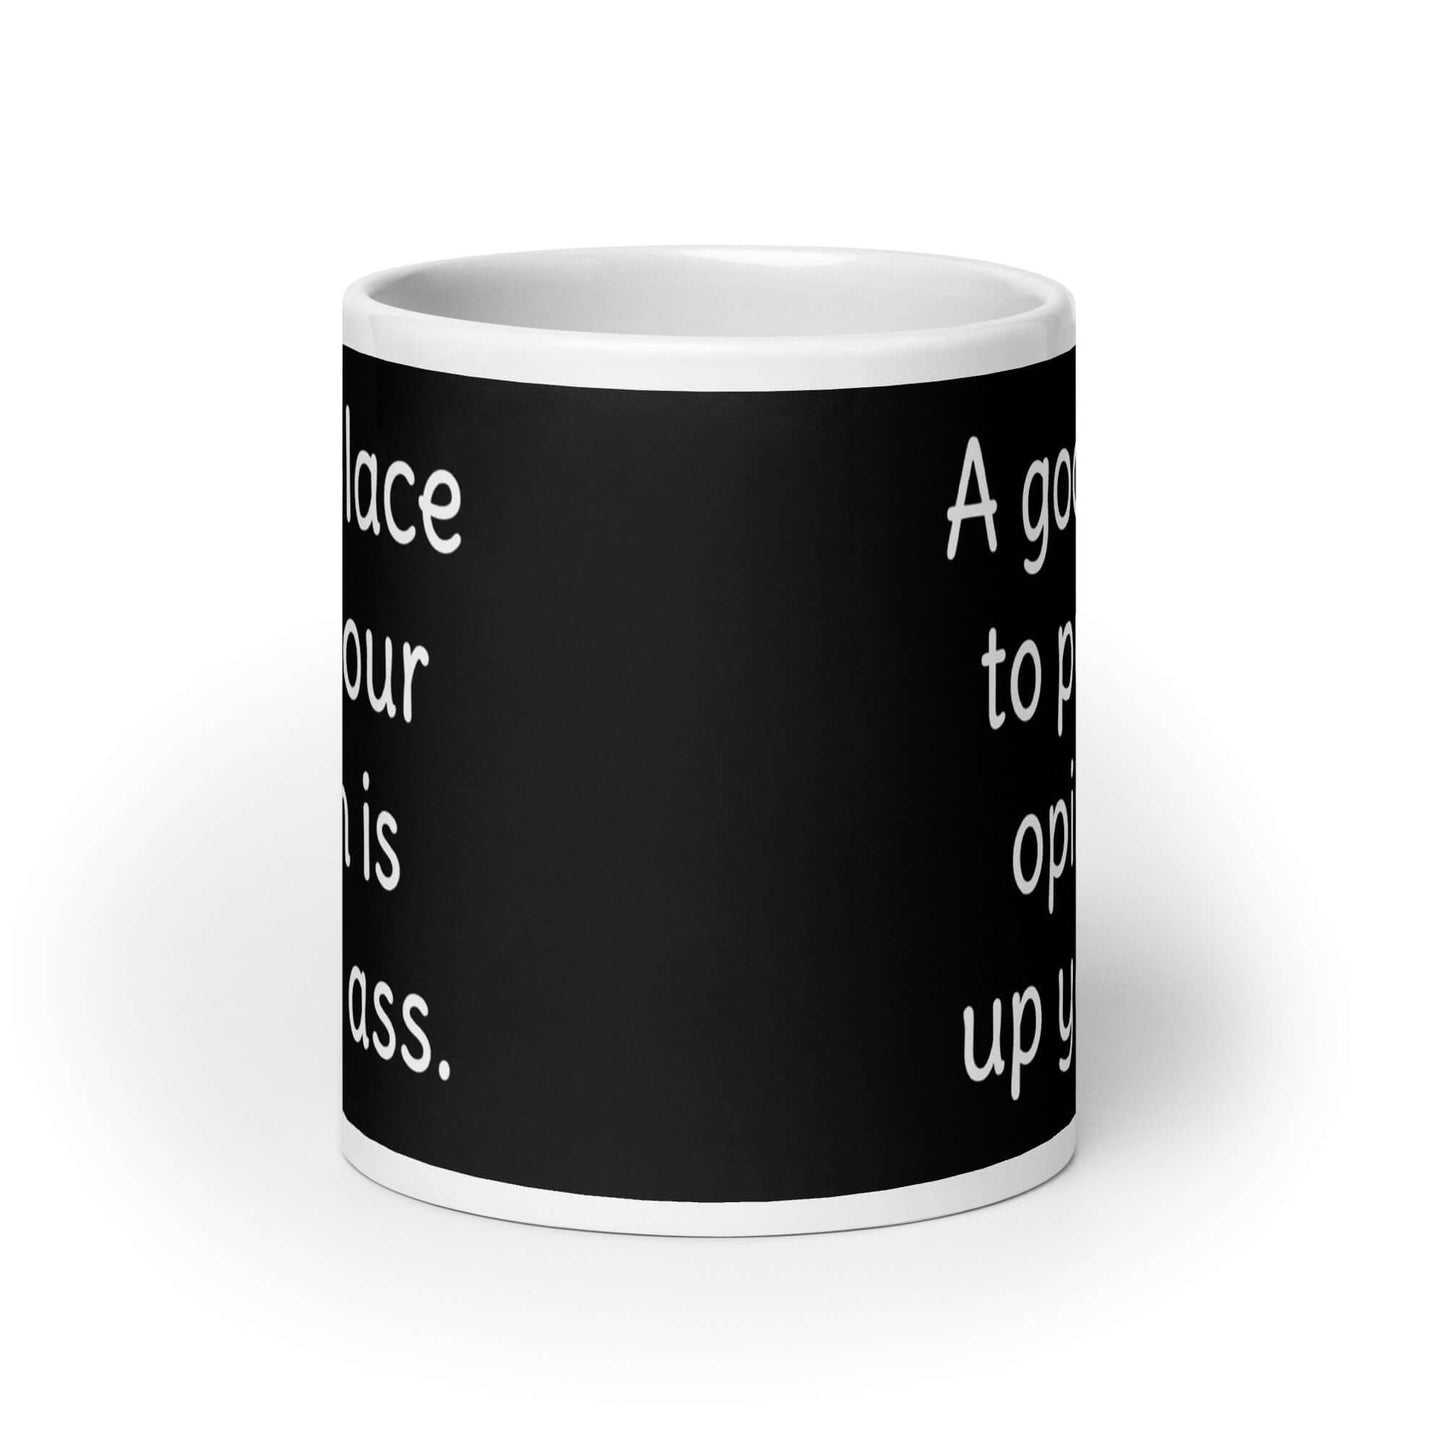 Good place to put your opinion is up your ass sarcastic rude mug